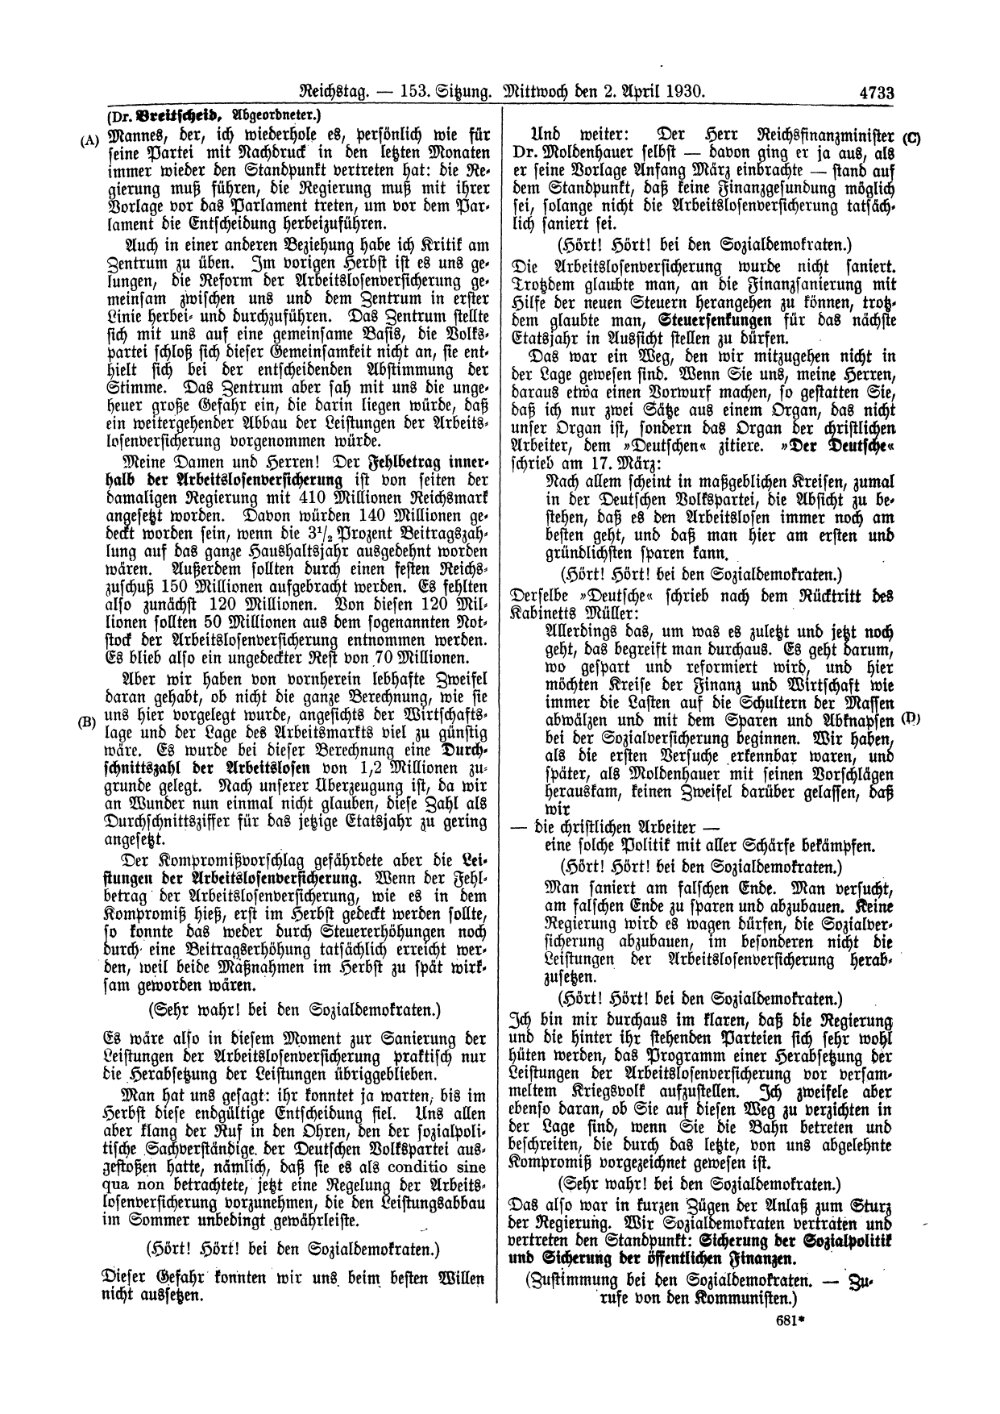 Scan of page 4733